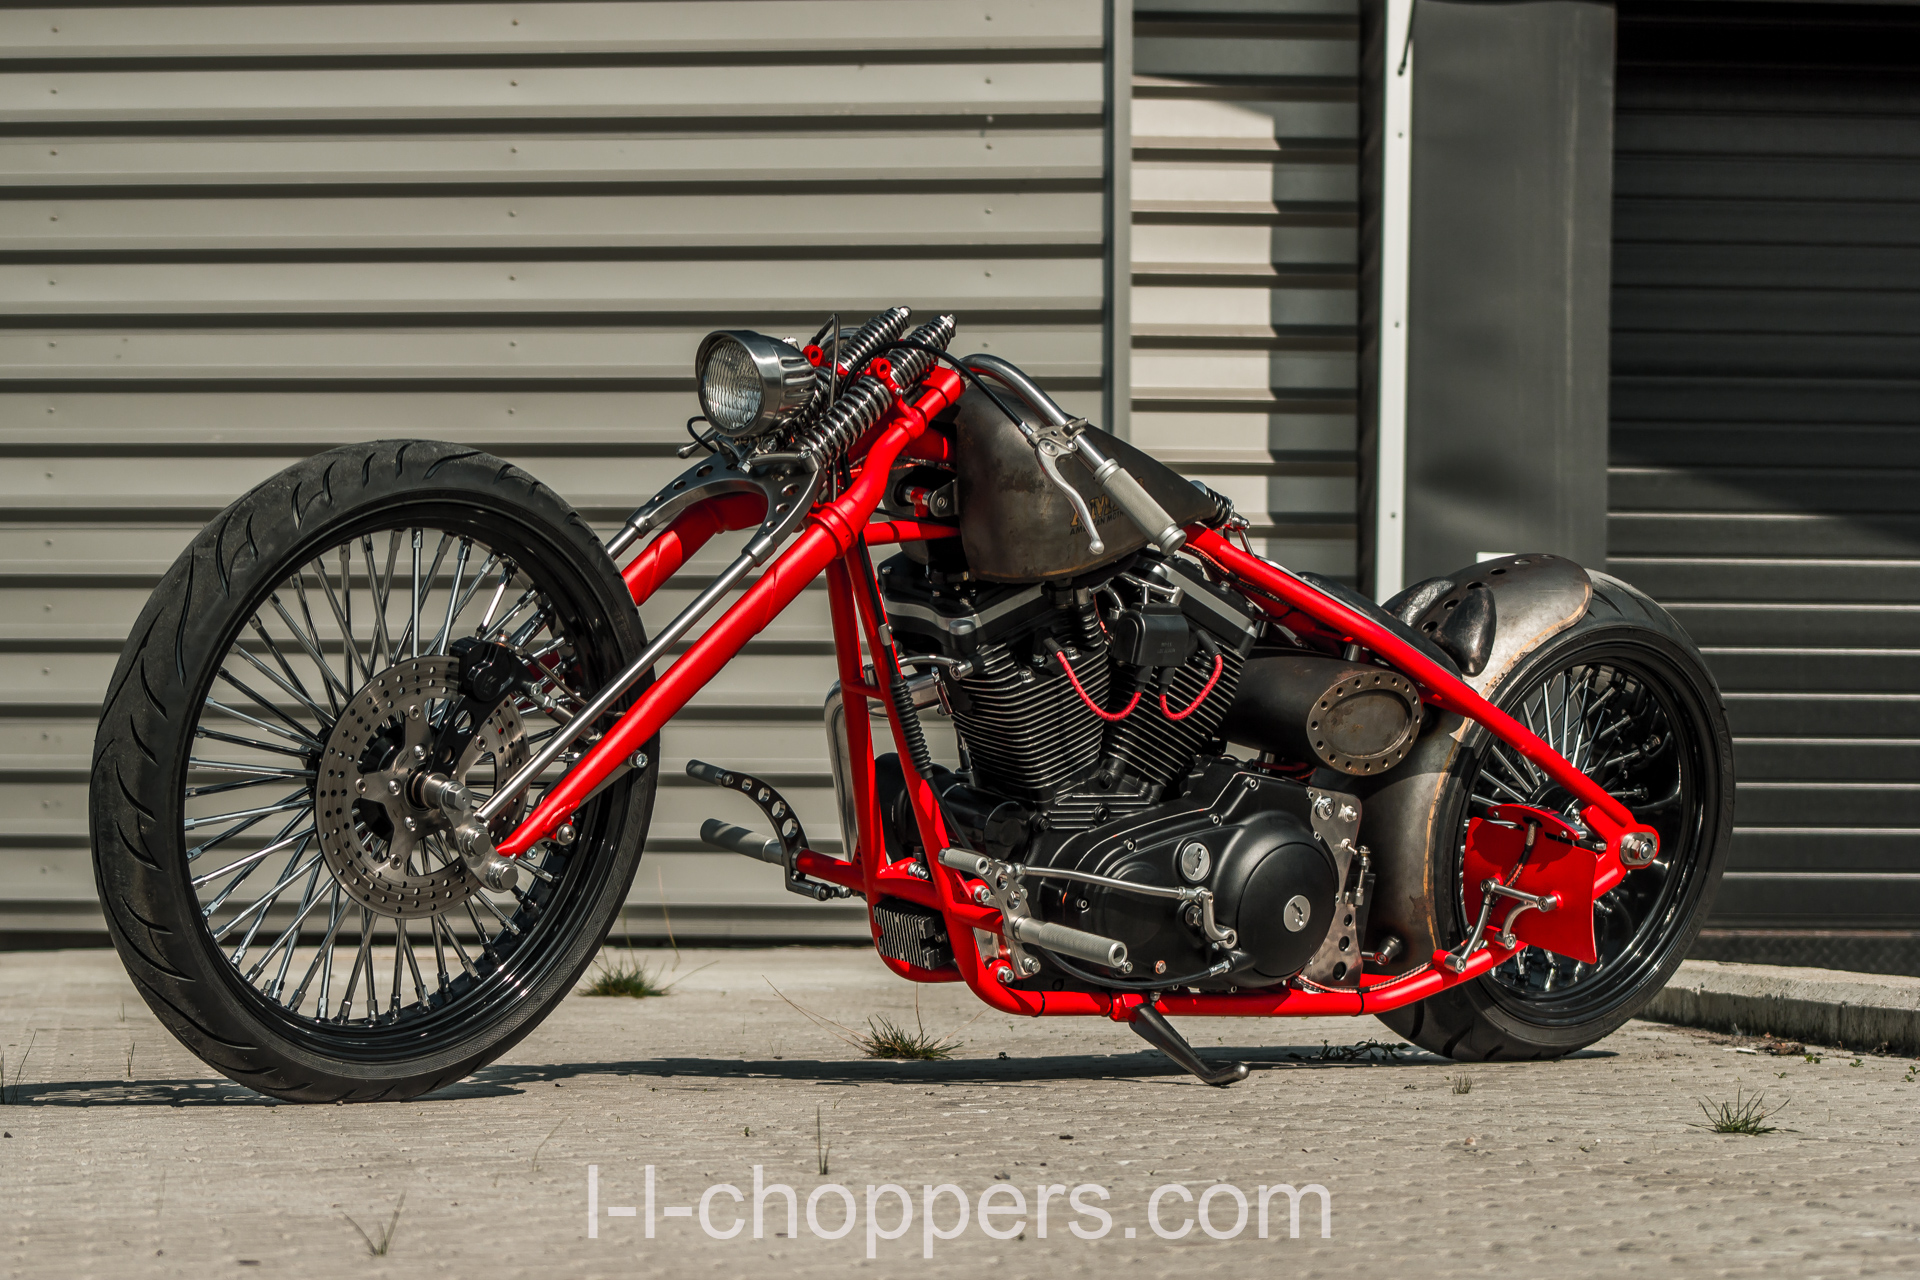 Photoshoot - WEST COAST Chopper for customer Fred - L&L Choppers